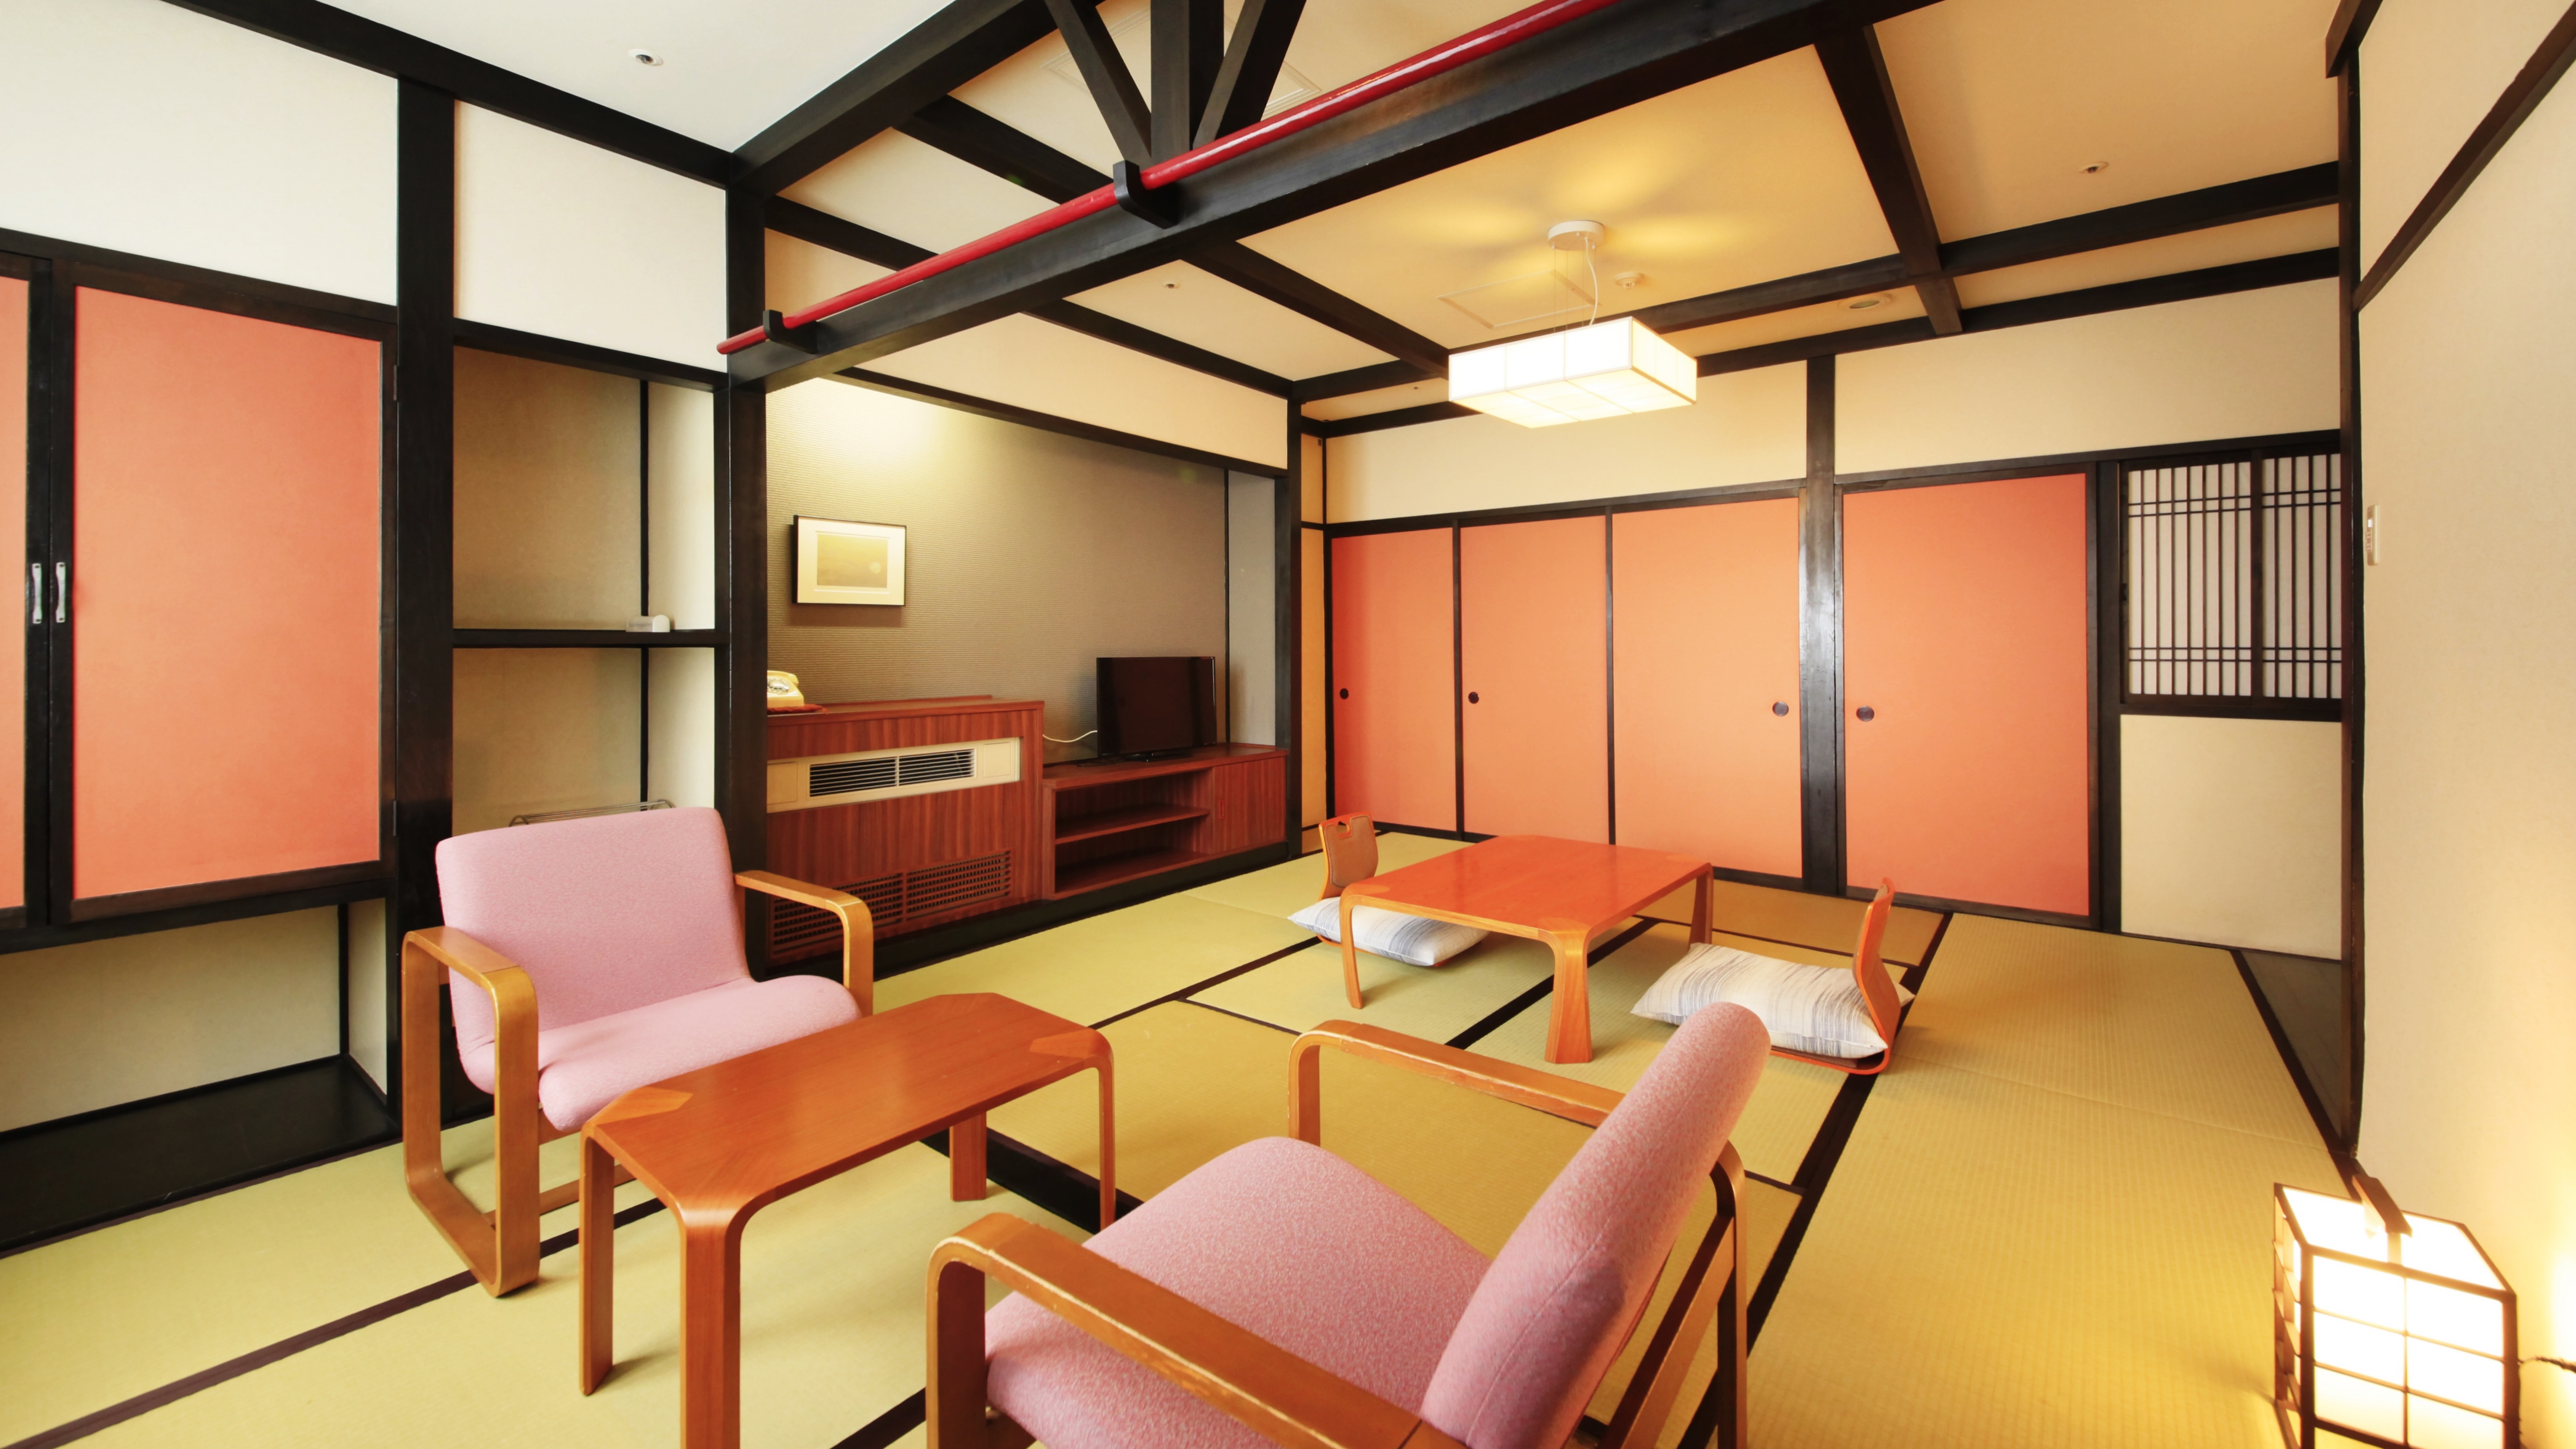 ■ [A retro-style Japanese-style room with 8 tatami mats]